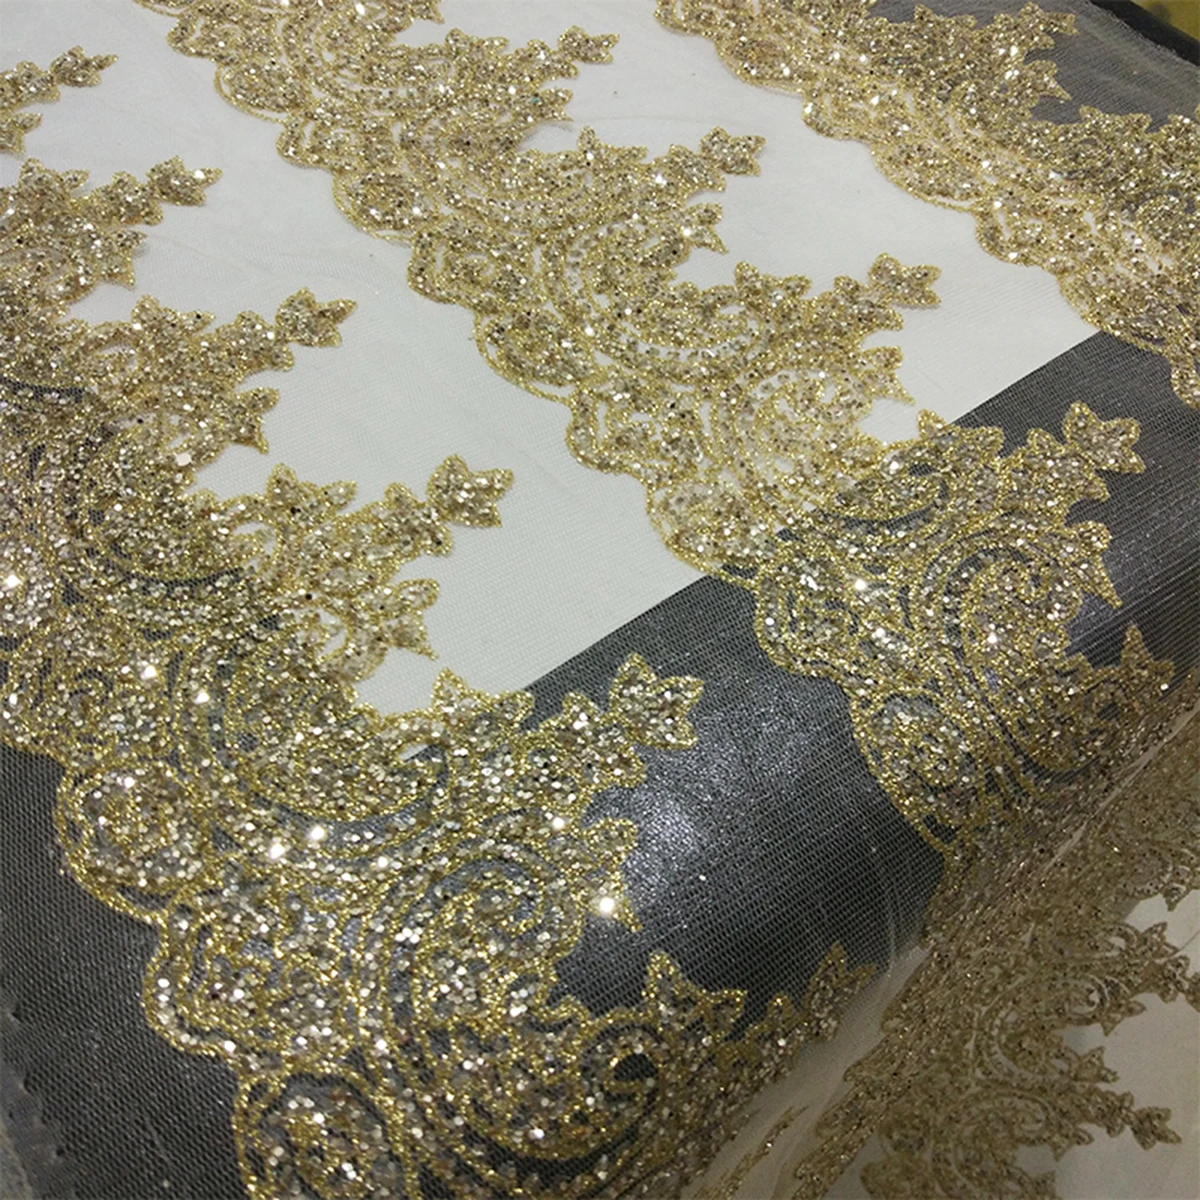 

Wholesale Luxurious Shiny Sequin Border Lace Fabric Trim Good Quality Silver Glitter Net Tulle Wedding Dress Fabric High Couture, Champagne, silver, customized